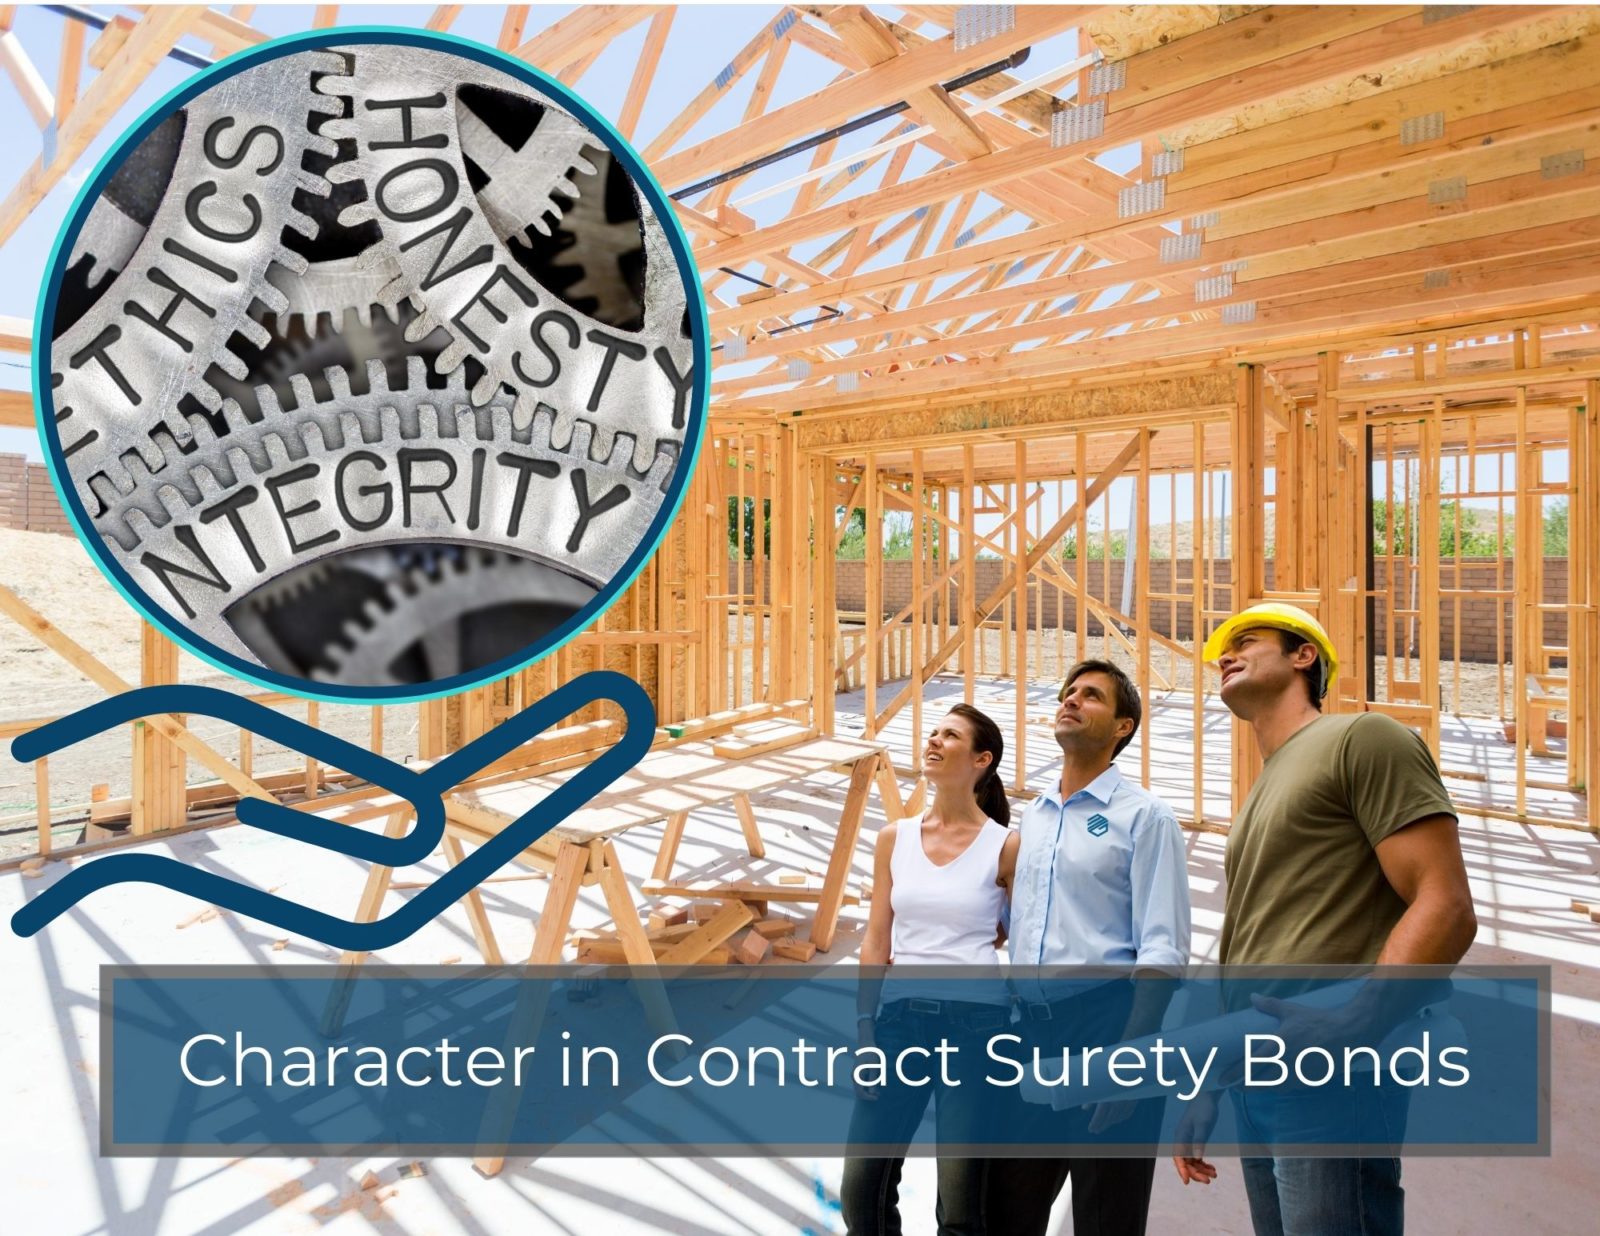 Character in Contract Surety Bonds. One contractor and two people on a construction site looking up at a circle with "Honesty, Integrity and Ethics" in the circle. A hand holding the circle